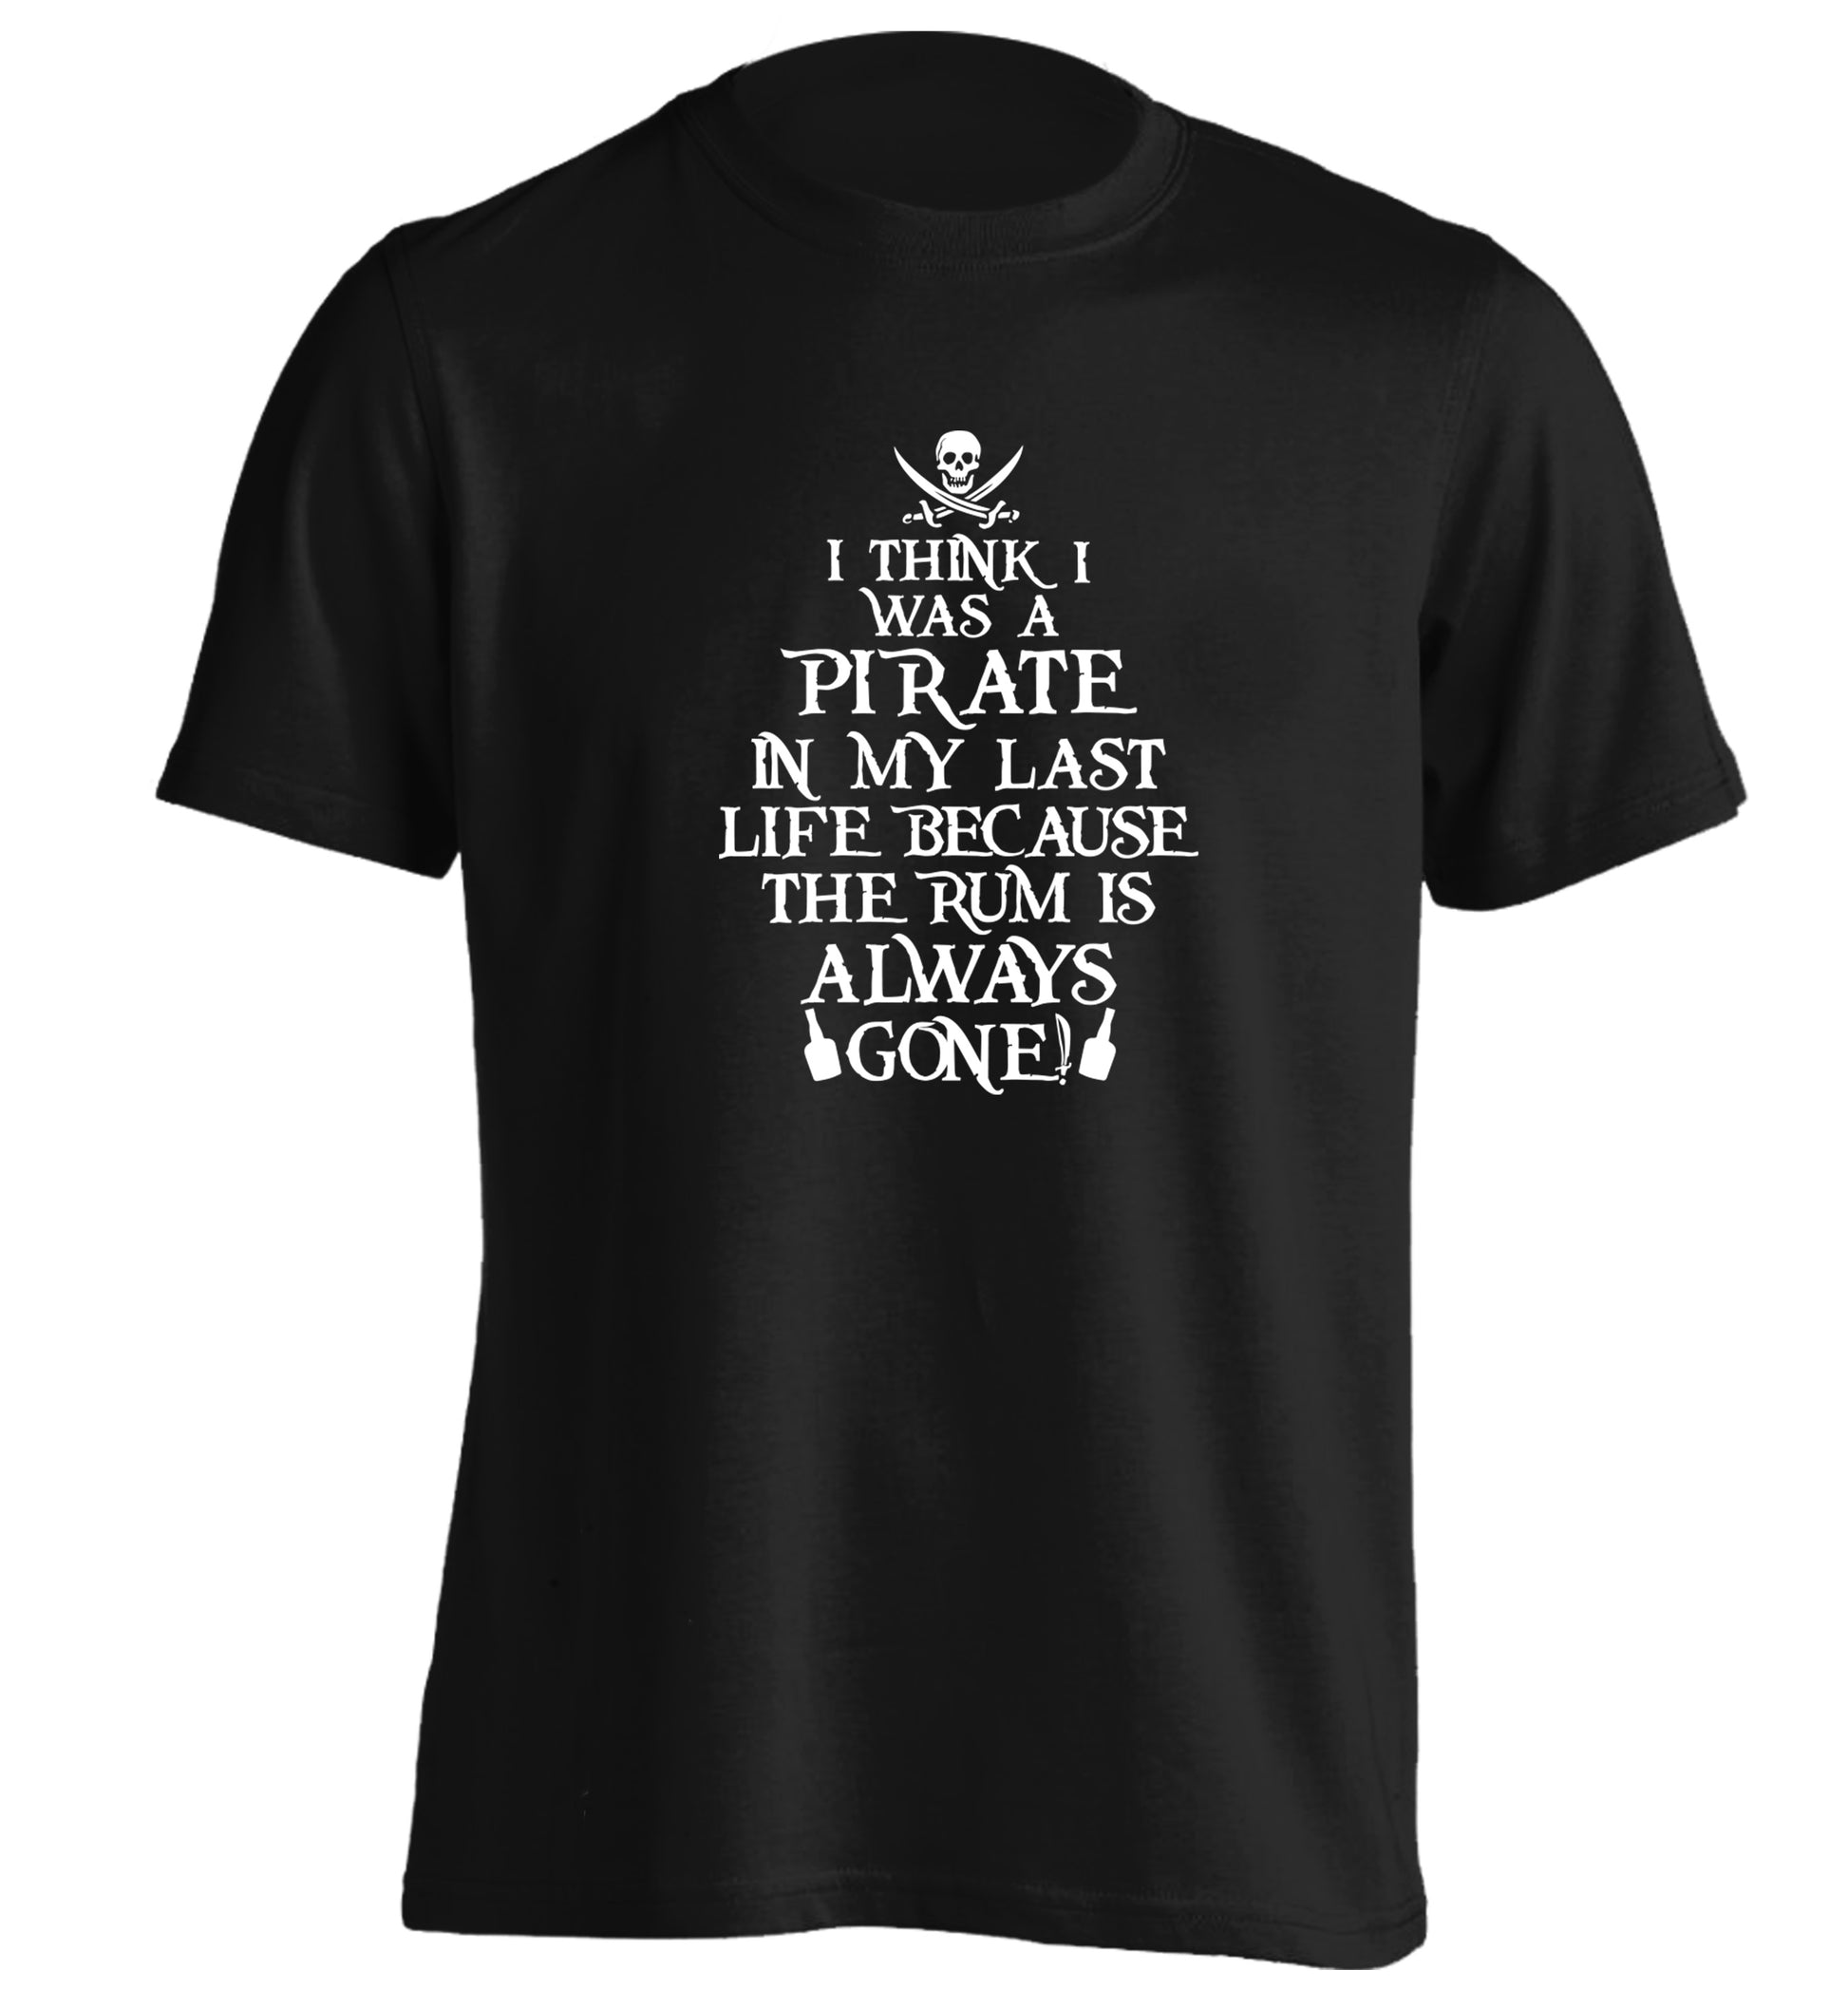 I think I was a pirate in my past life because the rum is always gone! adults unisex black Tshirt 2XL